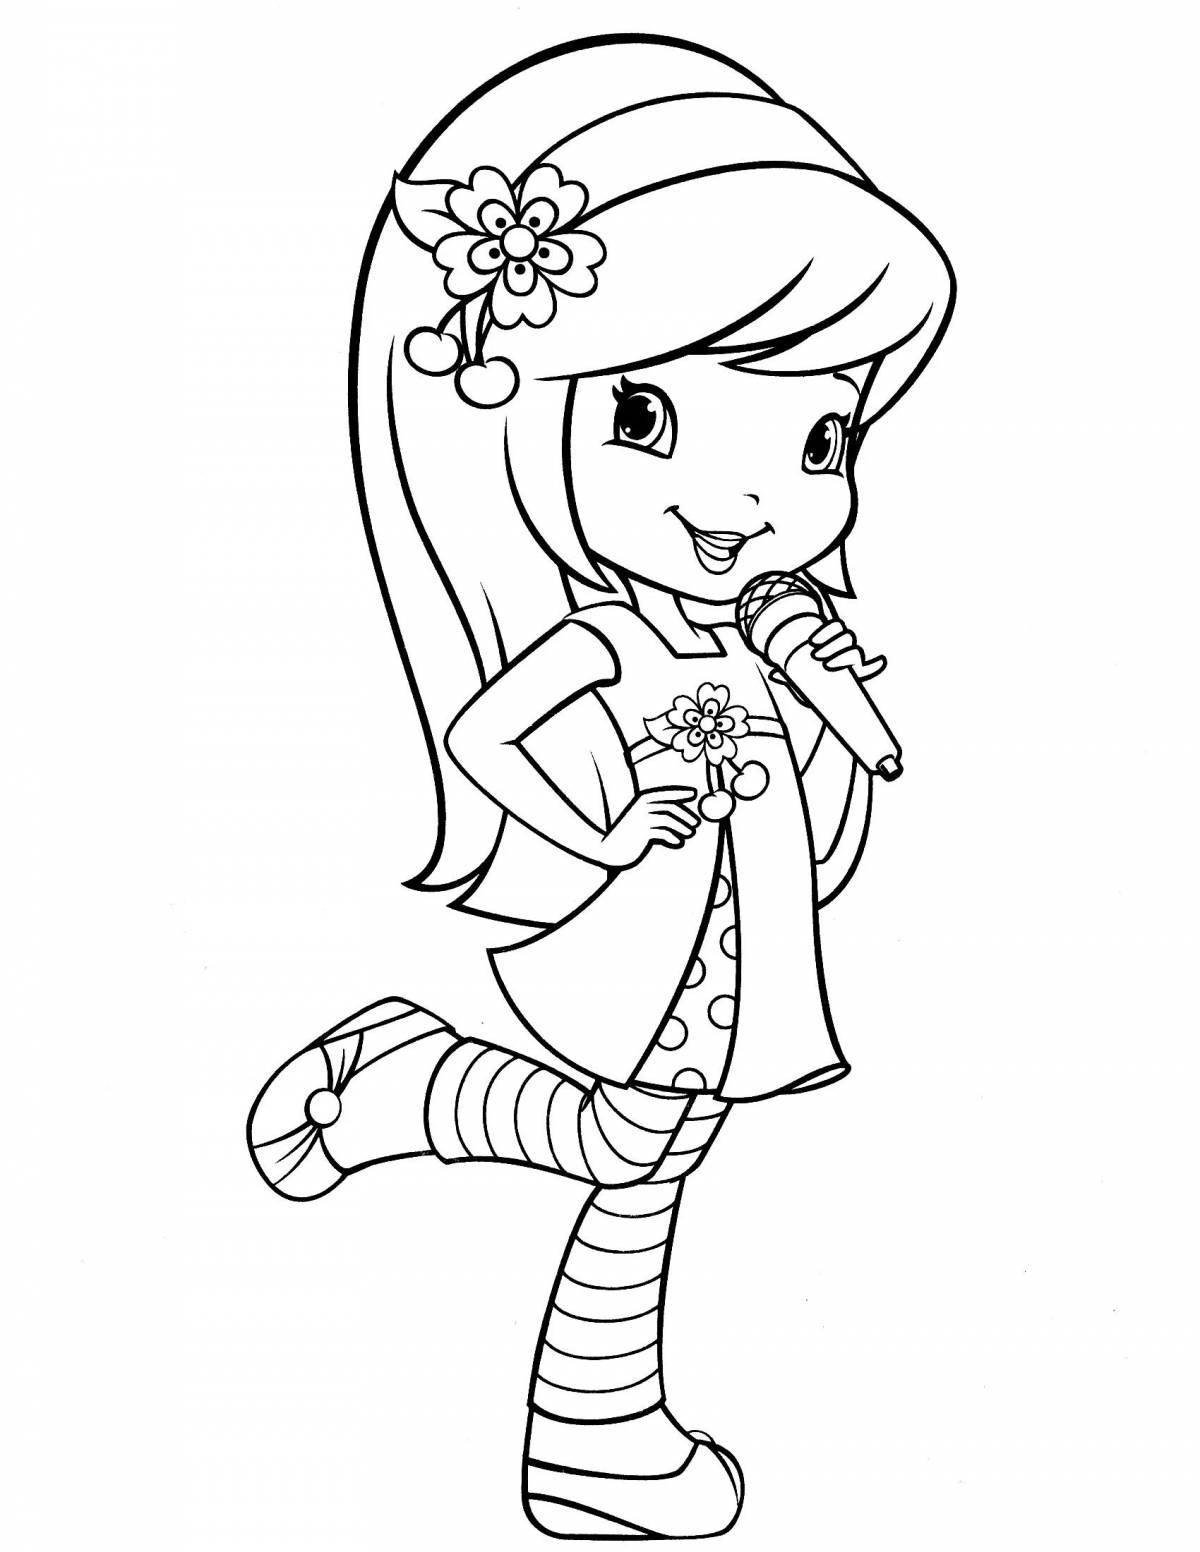 Bright Charlotte strawberry coloring pages for girls